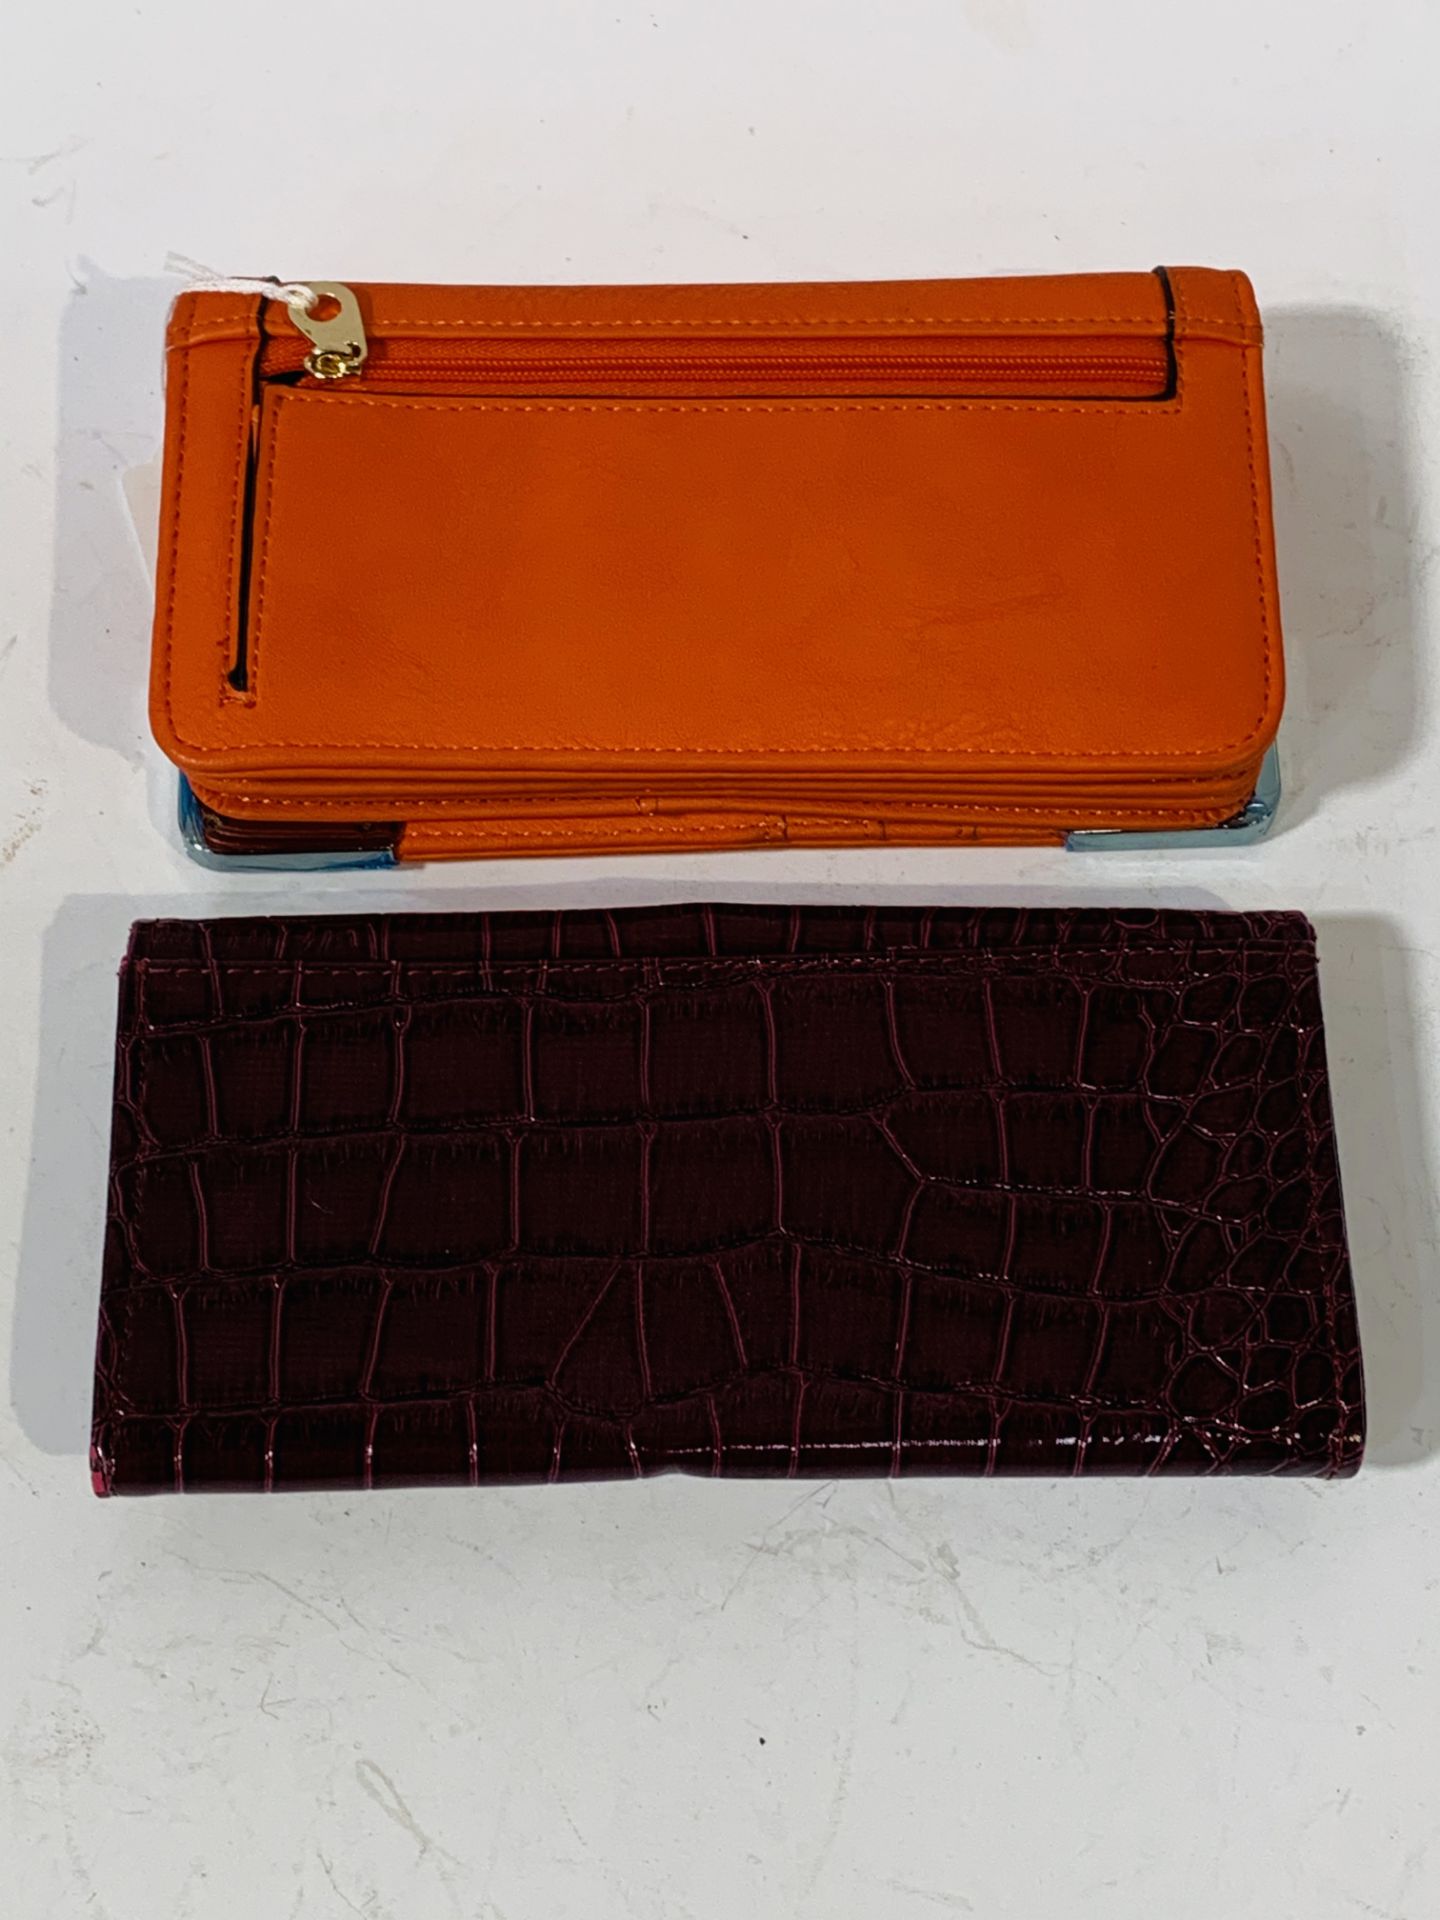 Dune orange leather wallet/purse, together with Cabrelli faux crocodile wallet. - Image 2 of 2